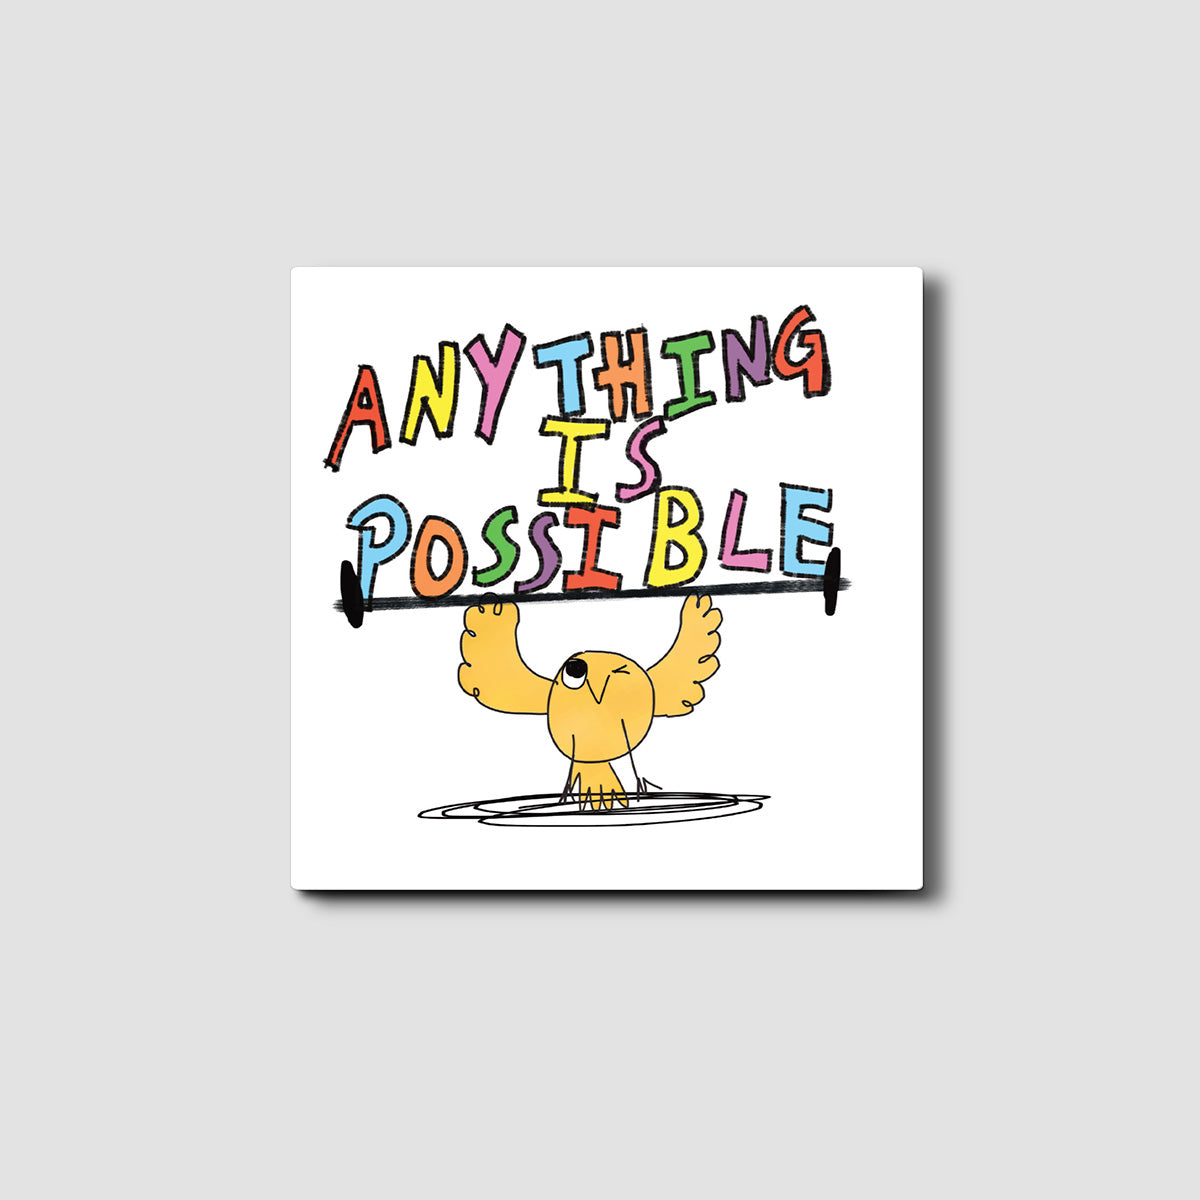 Anything is Possible Silly Eric Card